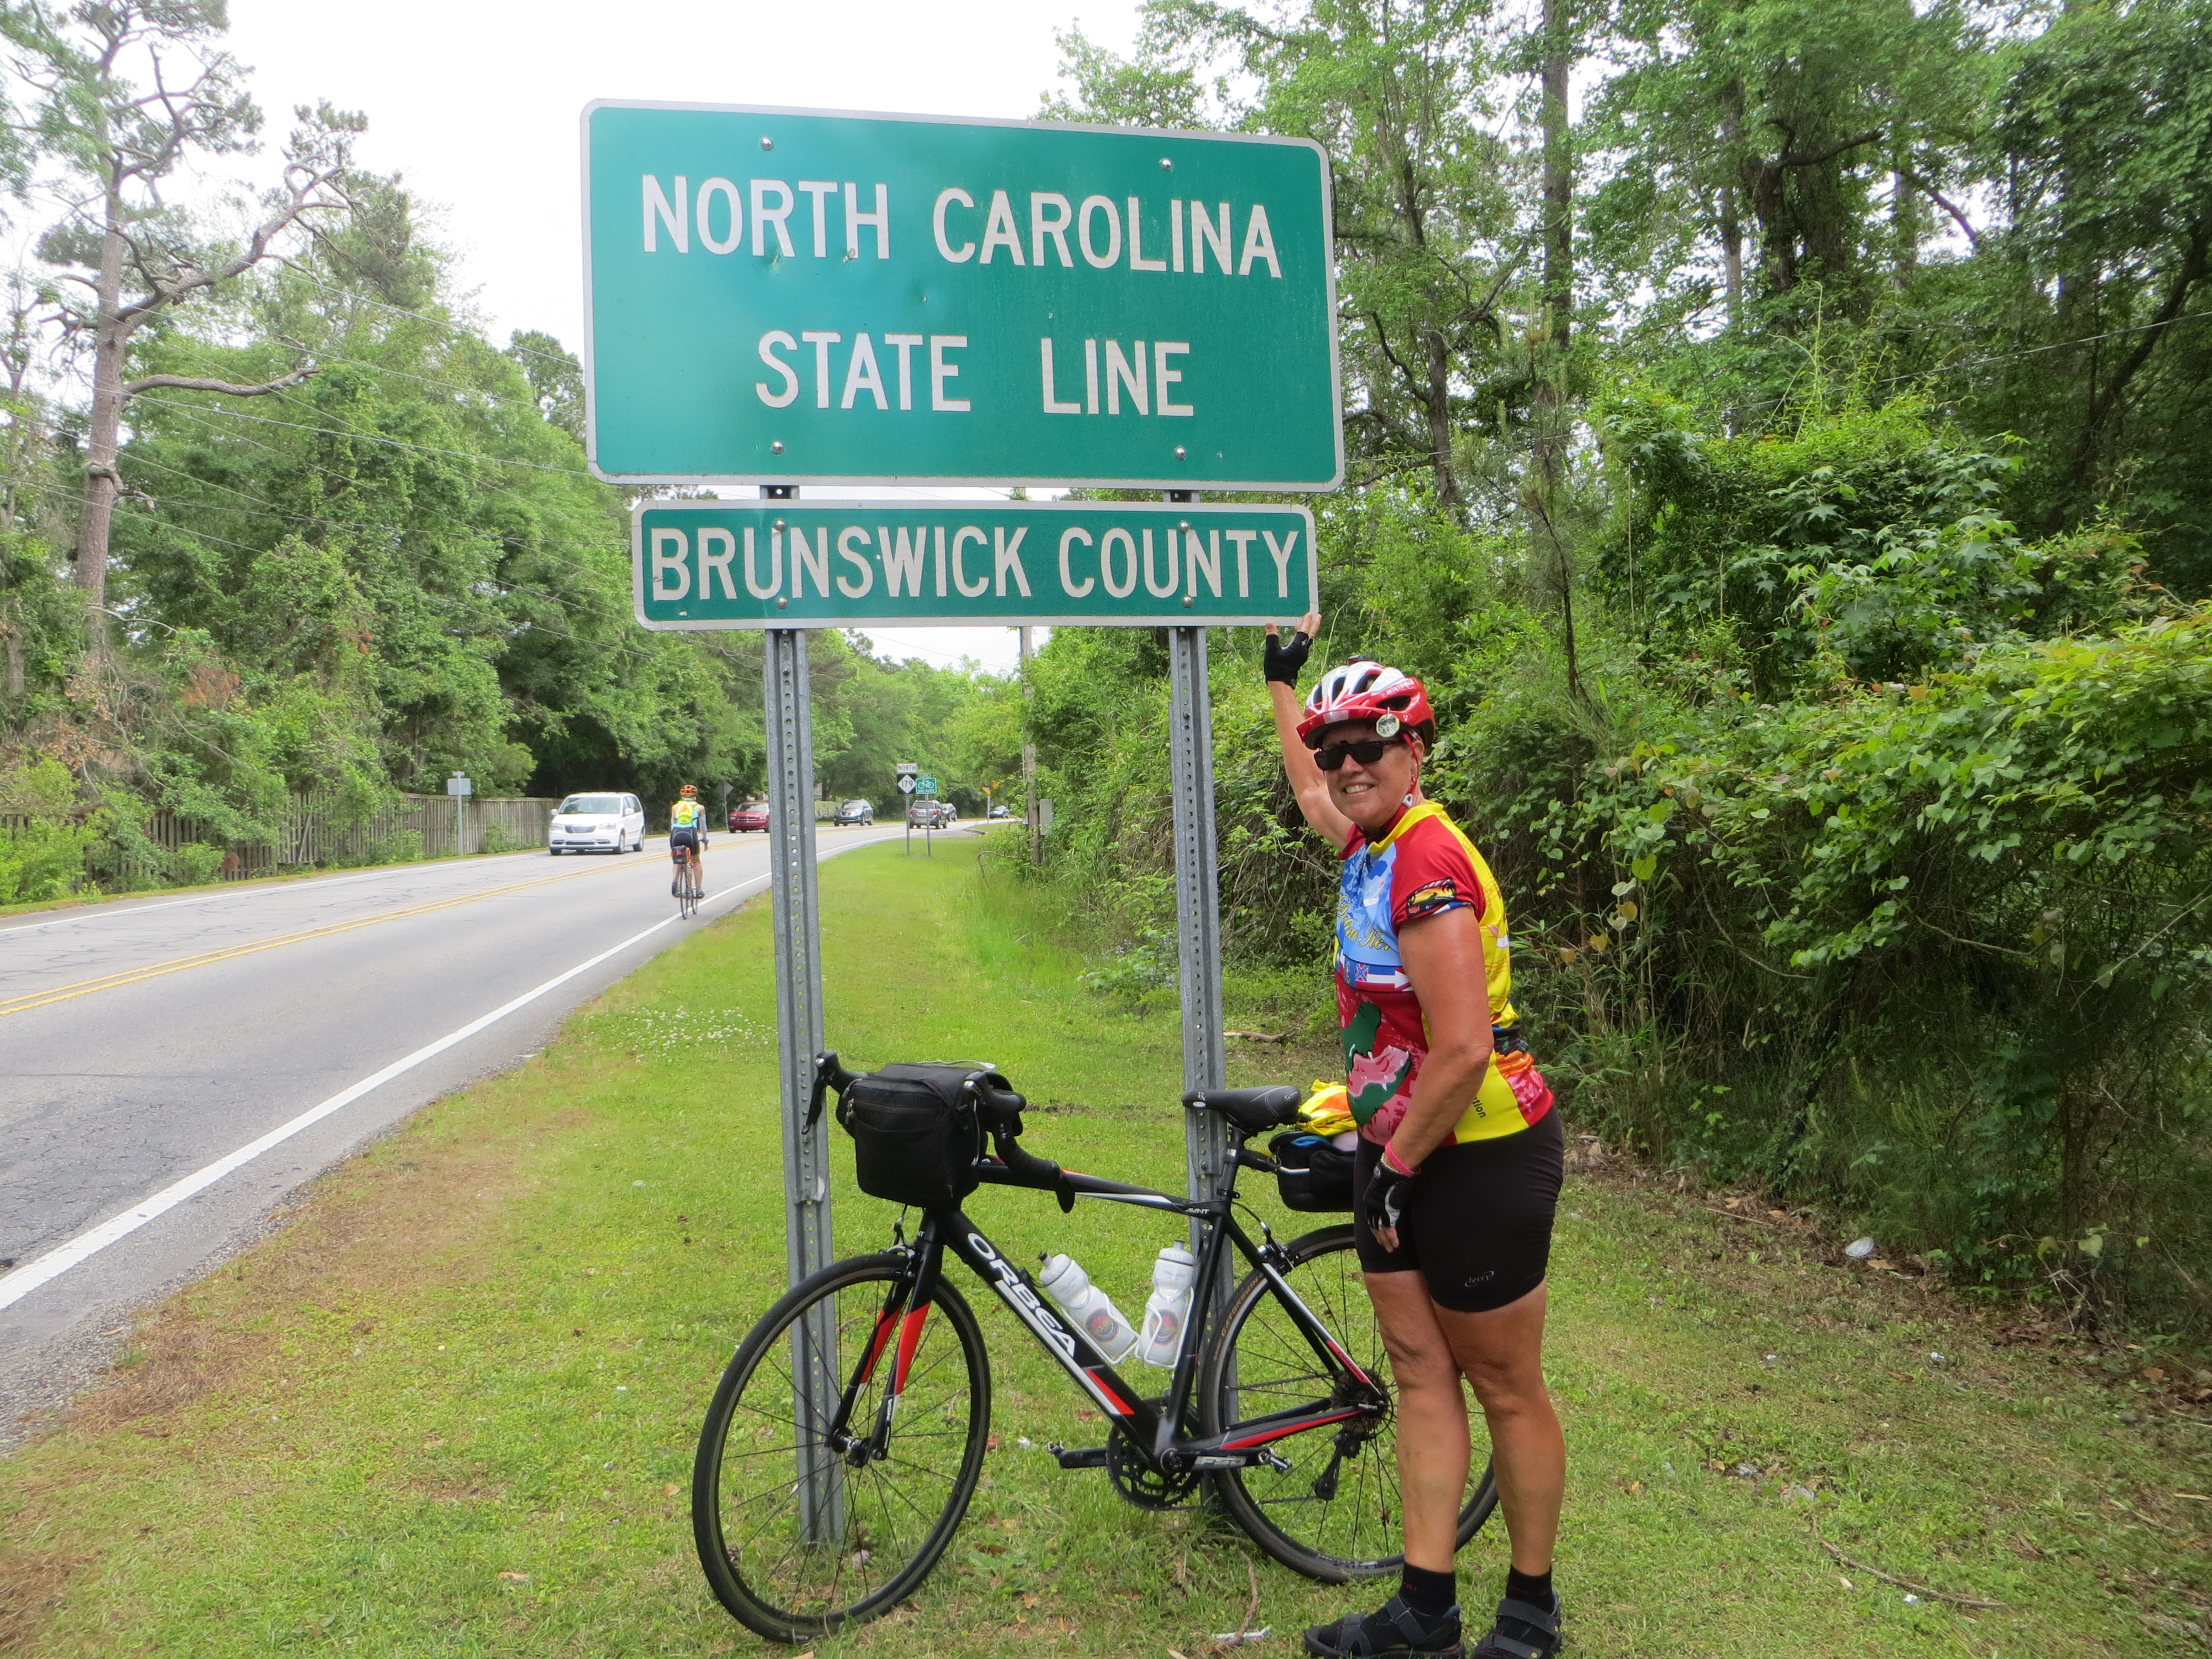 Nice to have a state line sign, unlike South Carolina.